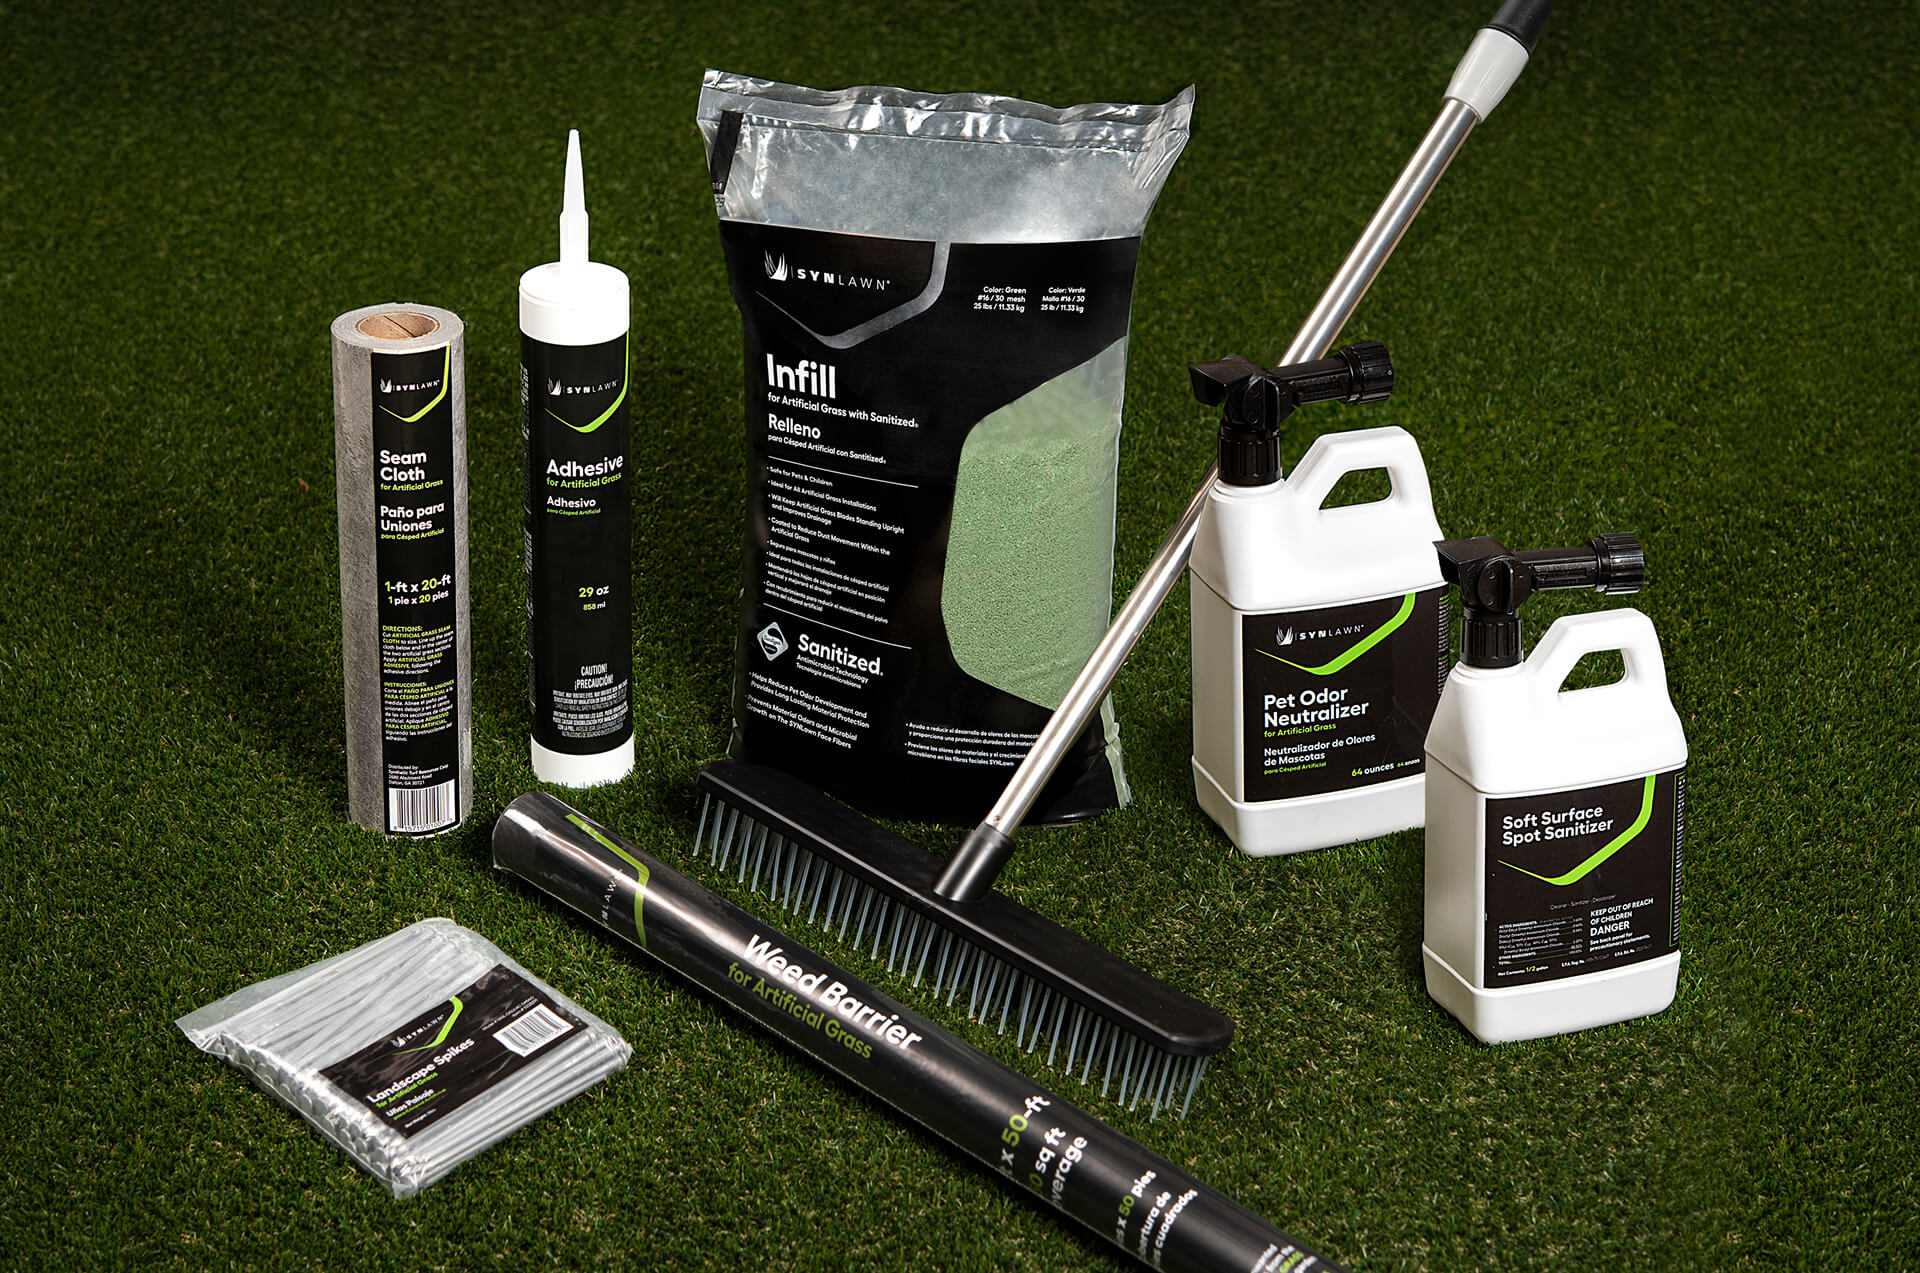 Artificial Grass accessories and tools arranged on top of artificial grass